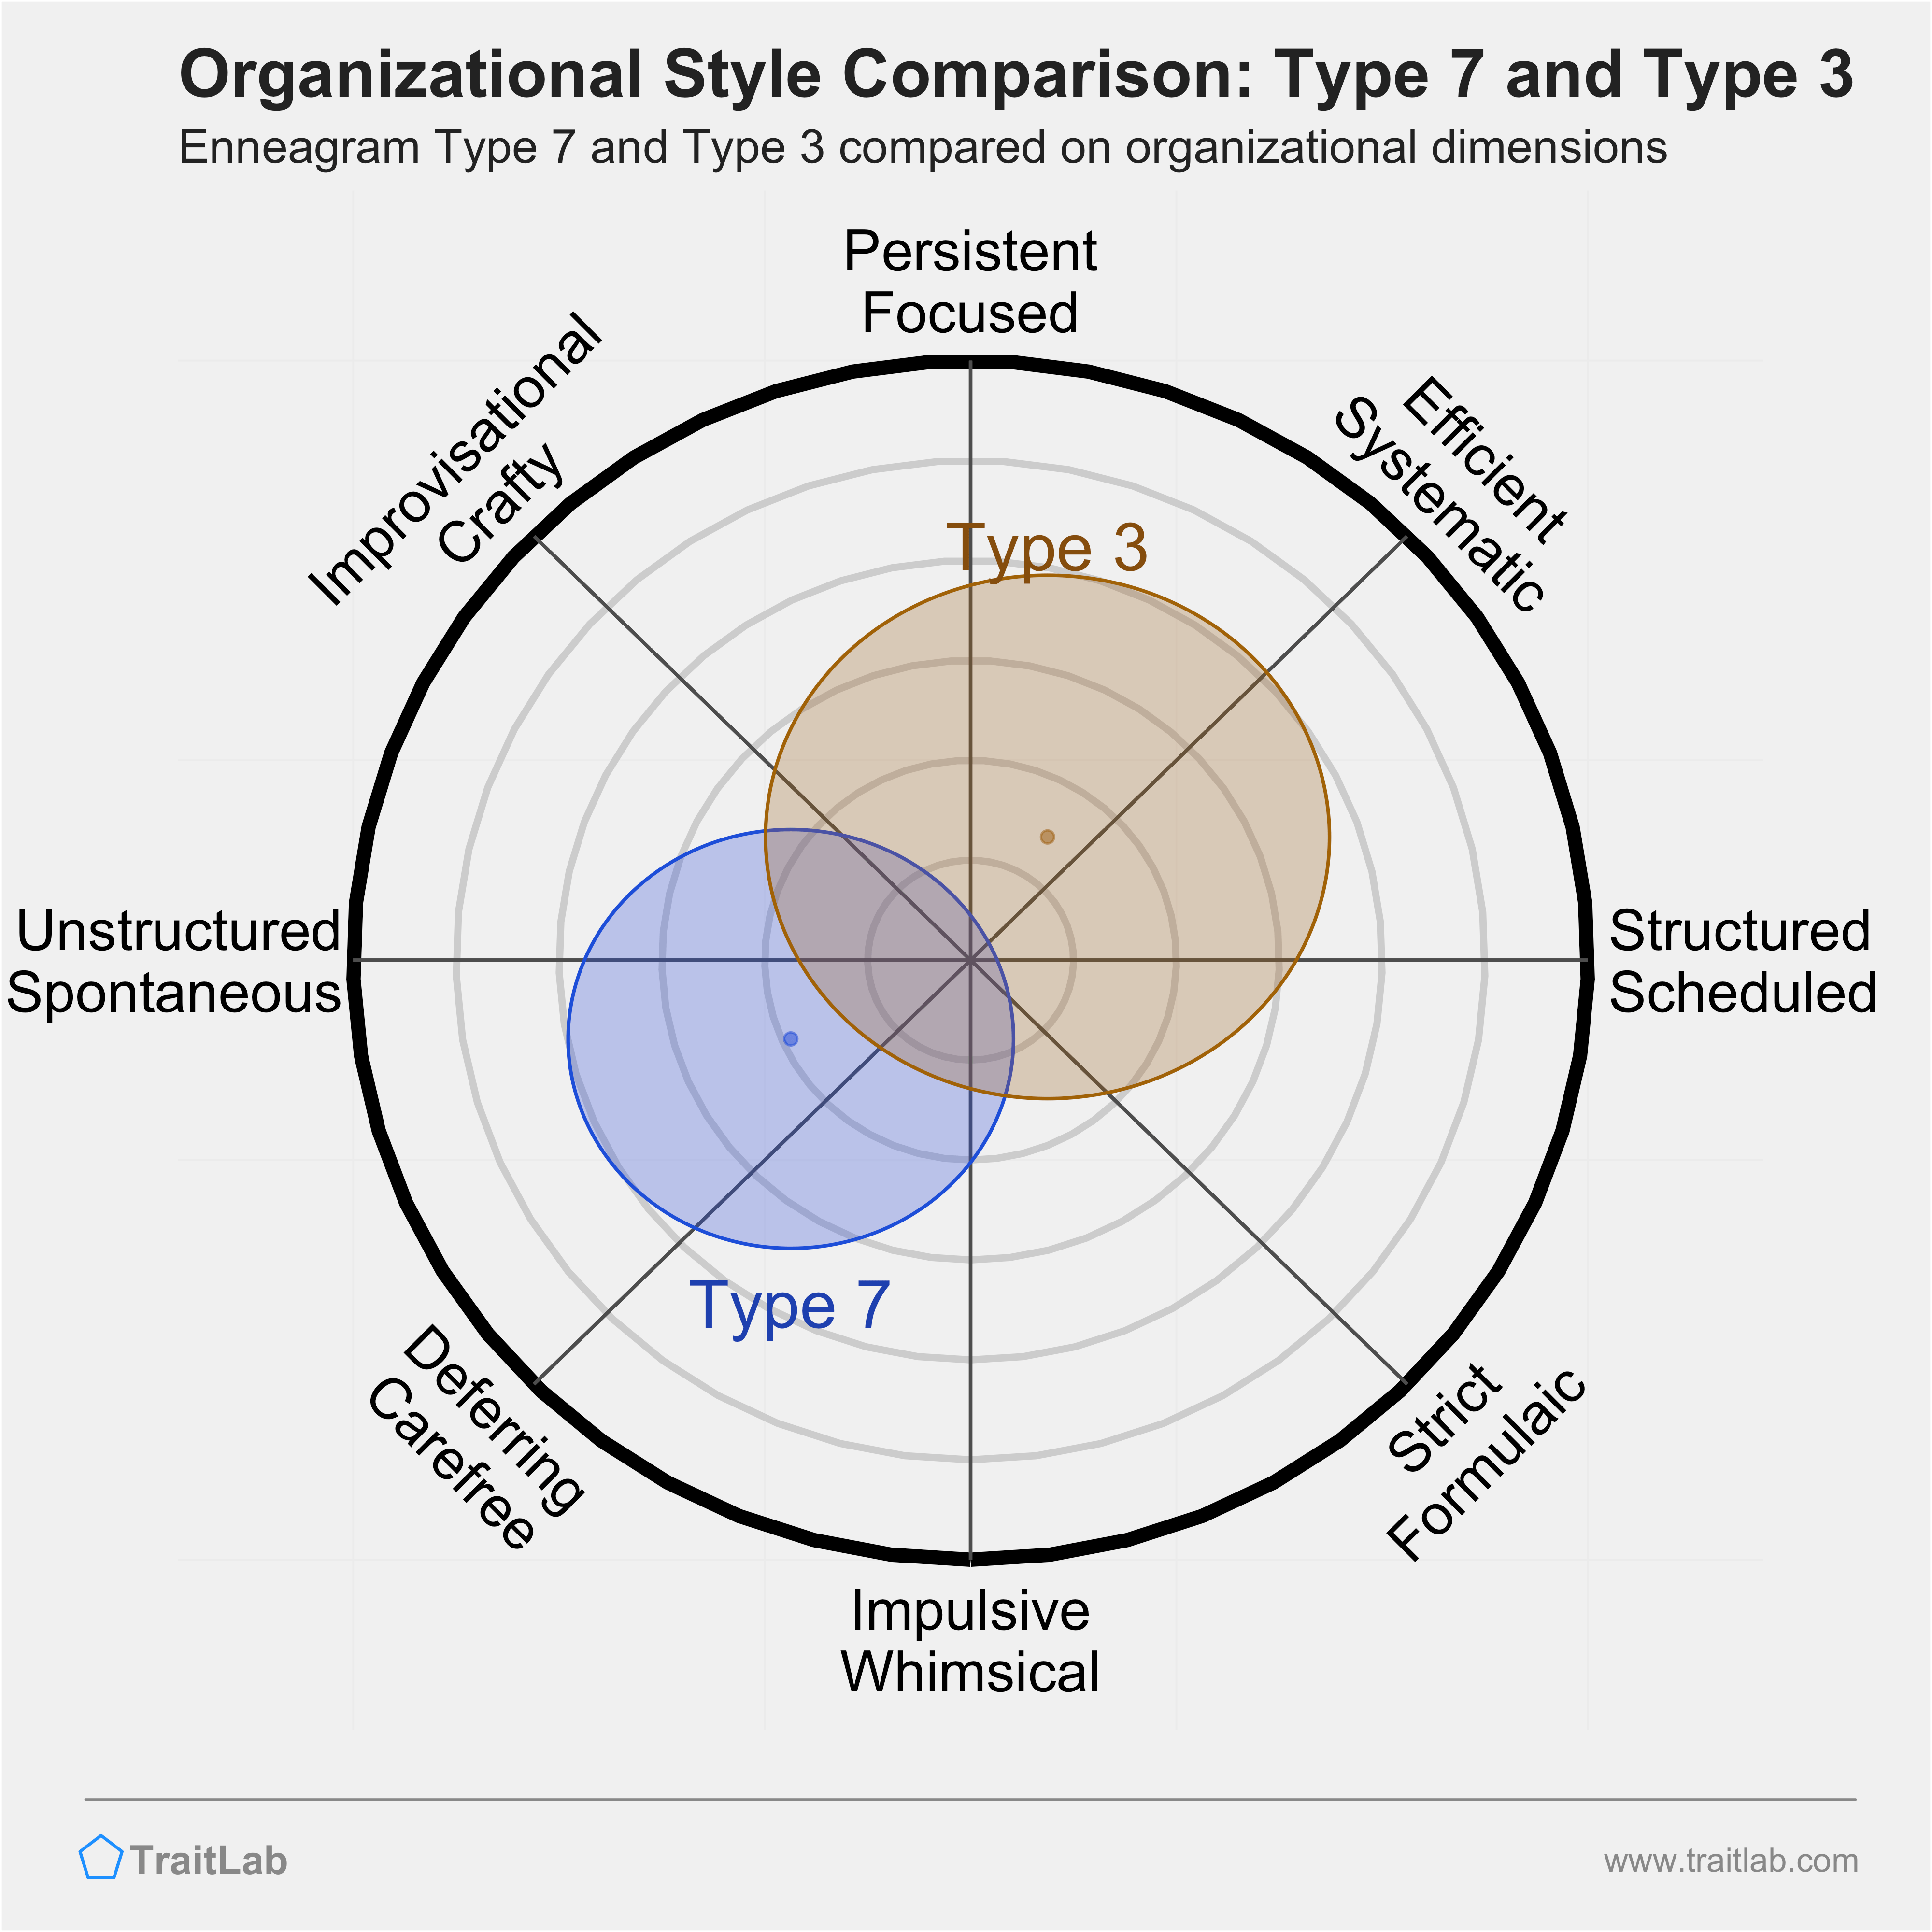 Type 7 and Type 3 comparison across organizational dimensions